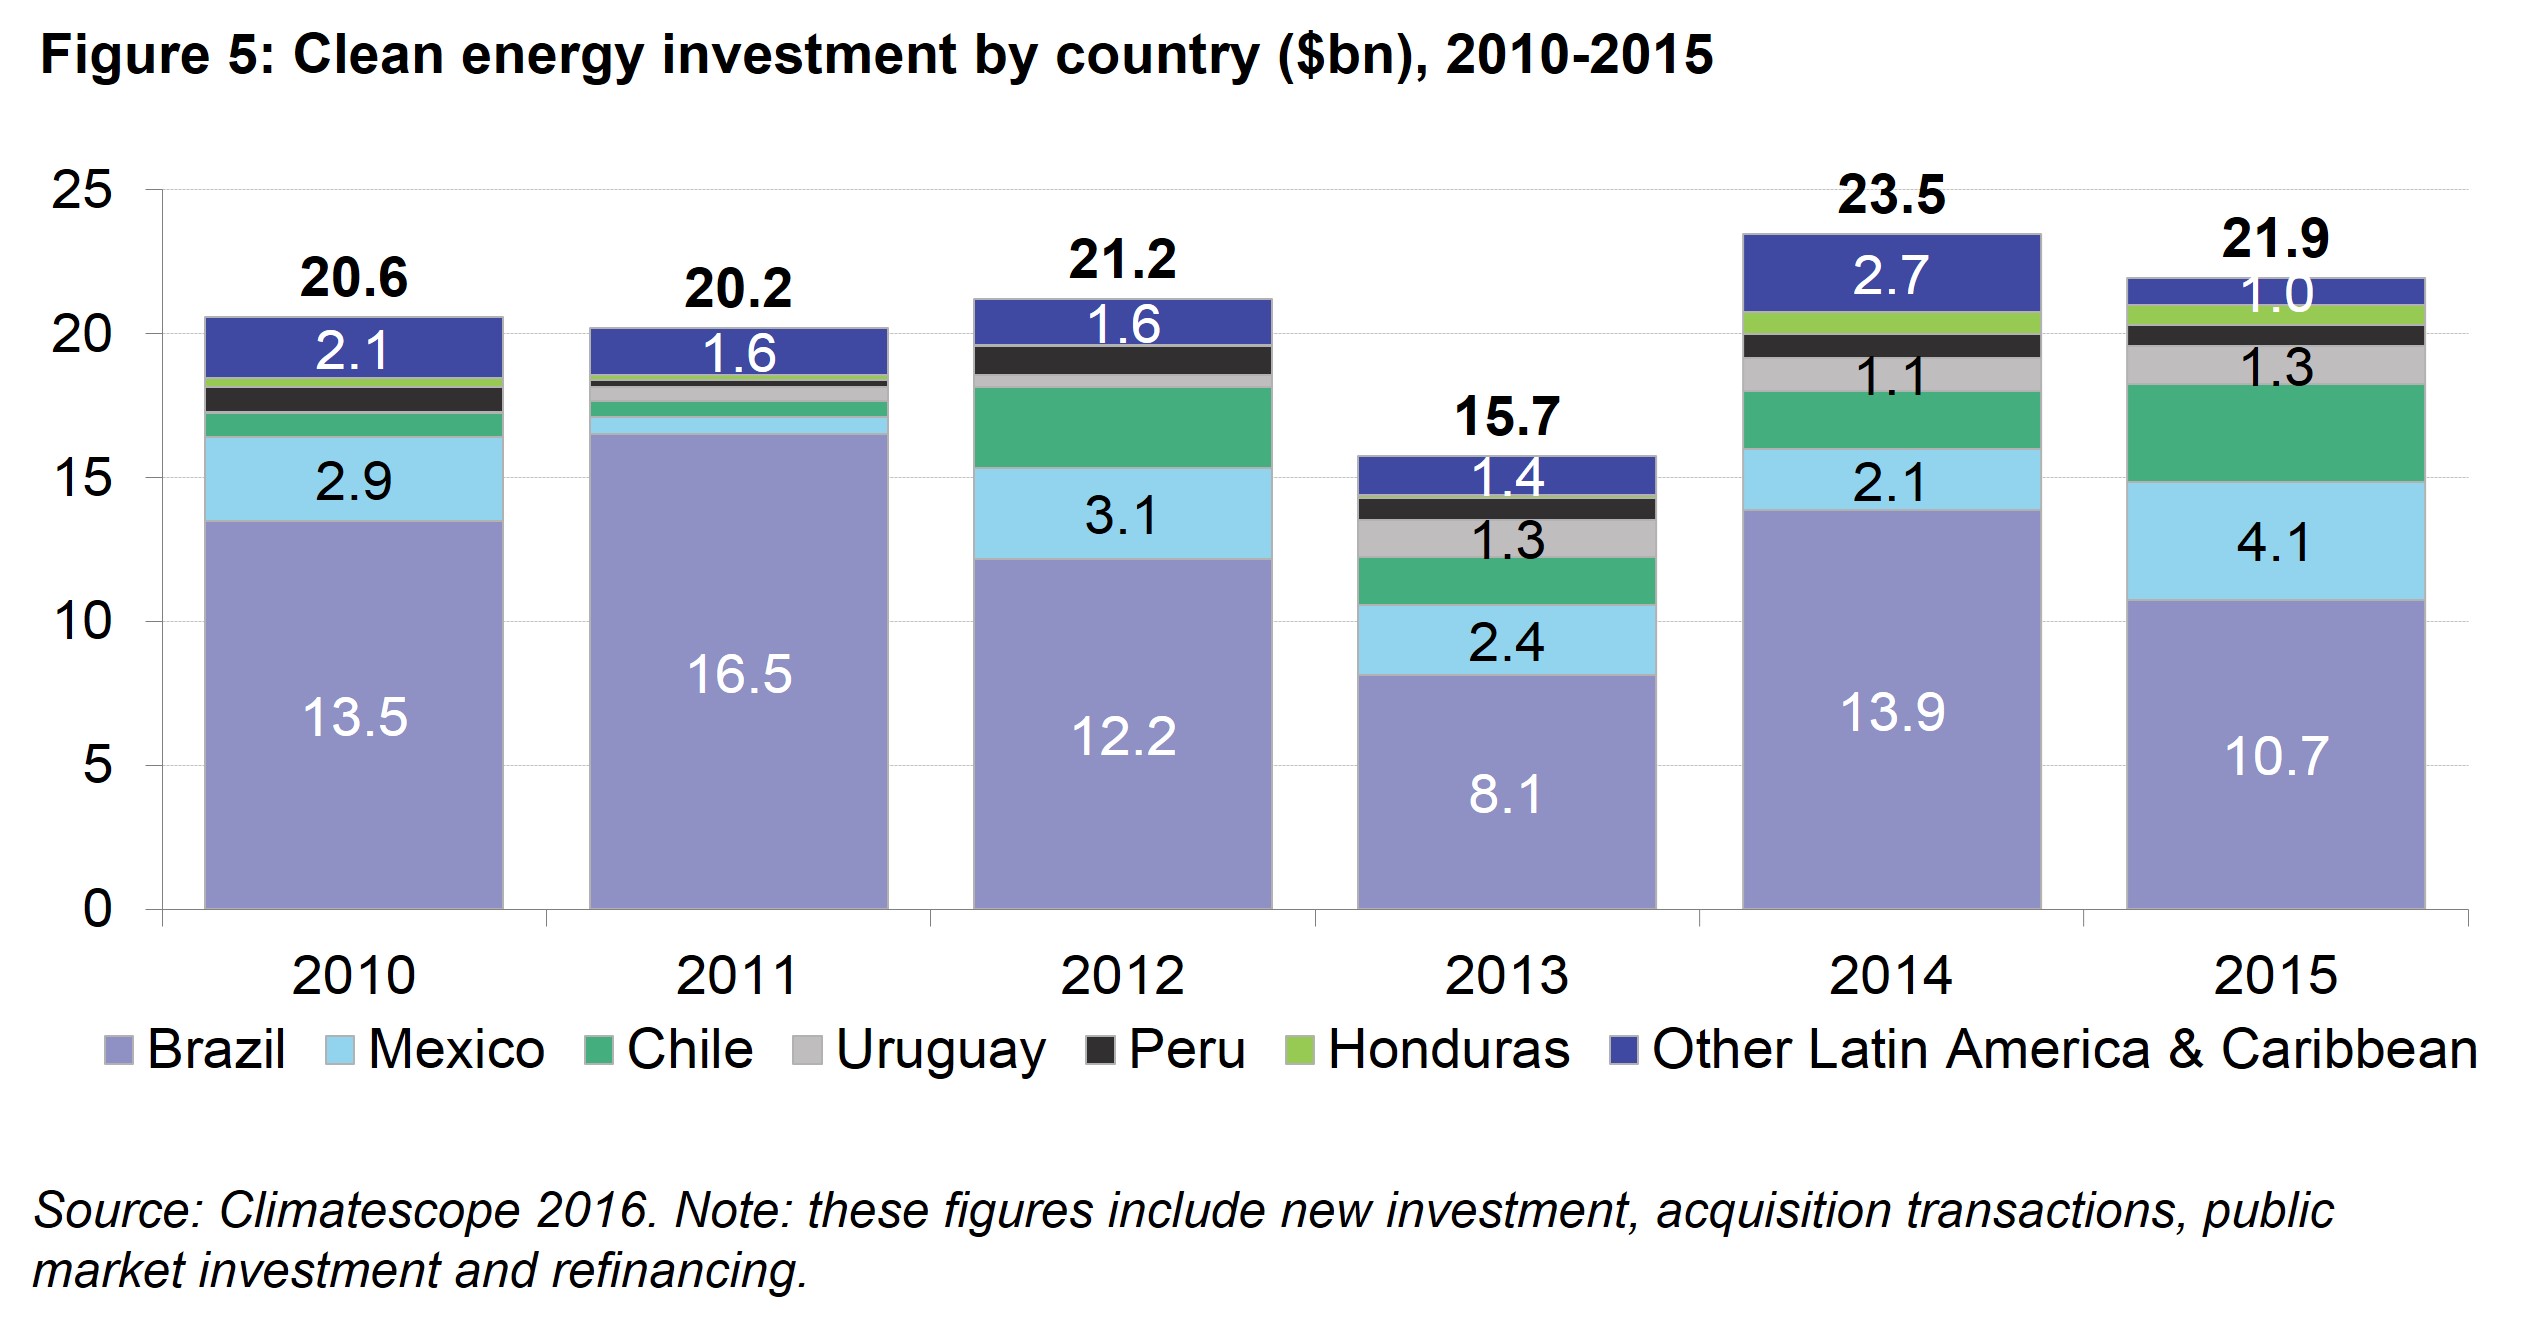 LAC Fig 5 - Clean energy investment by country, 2010 - 2015